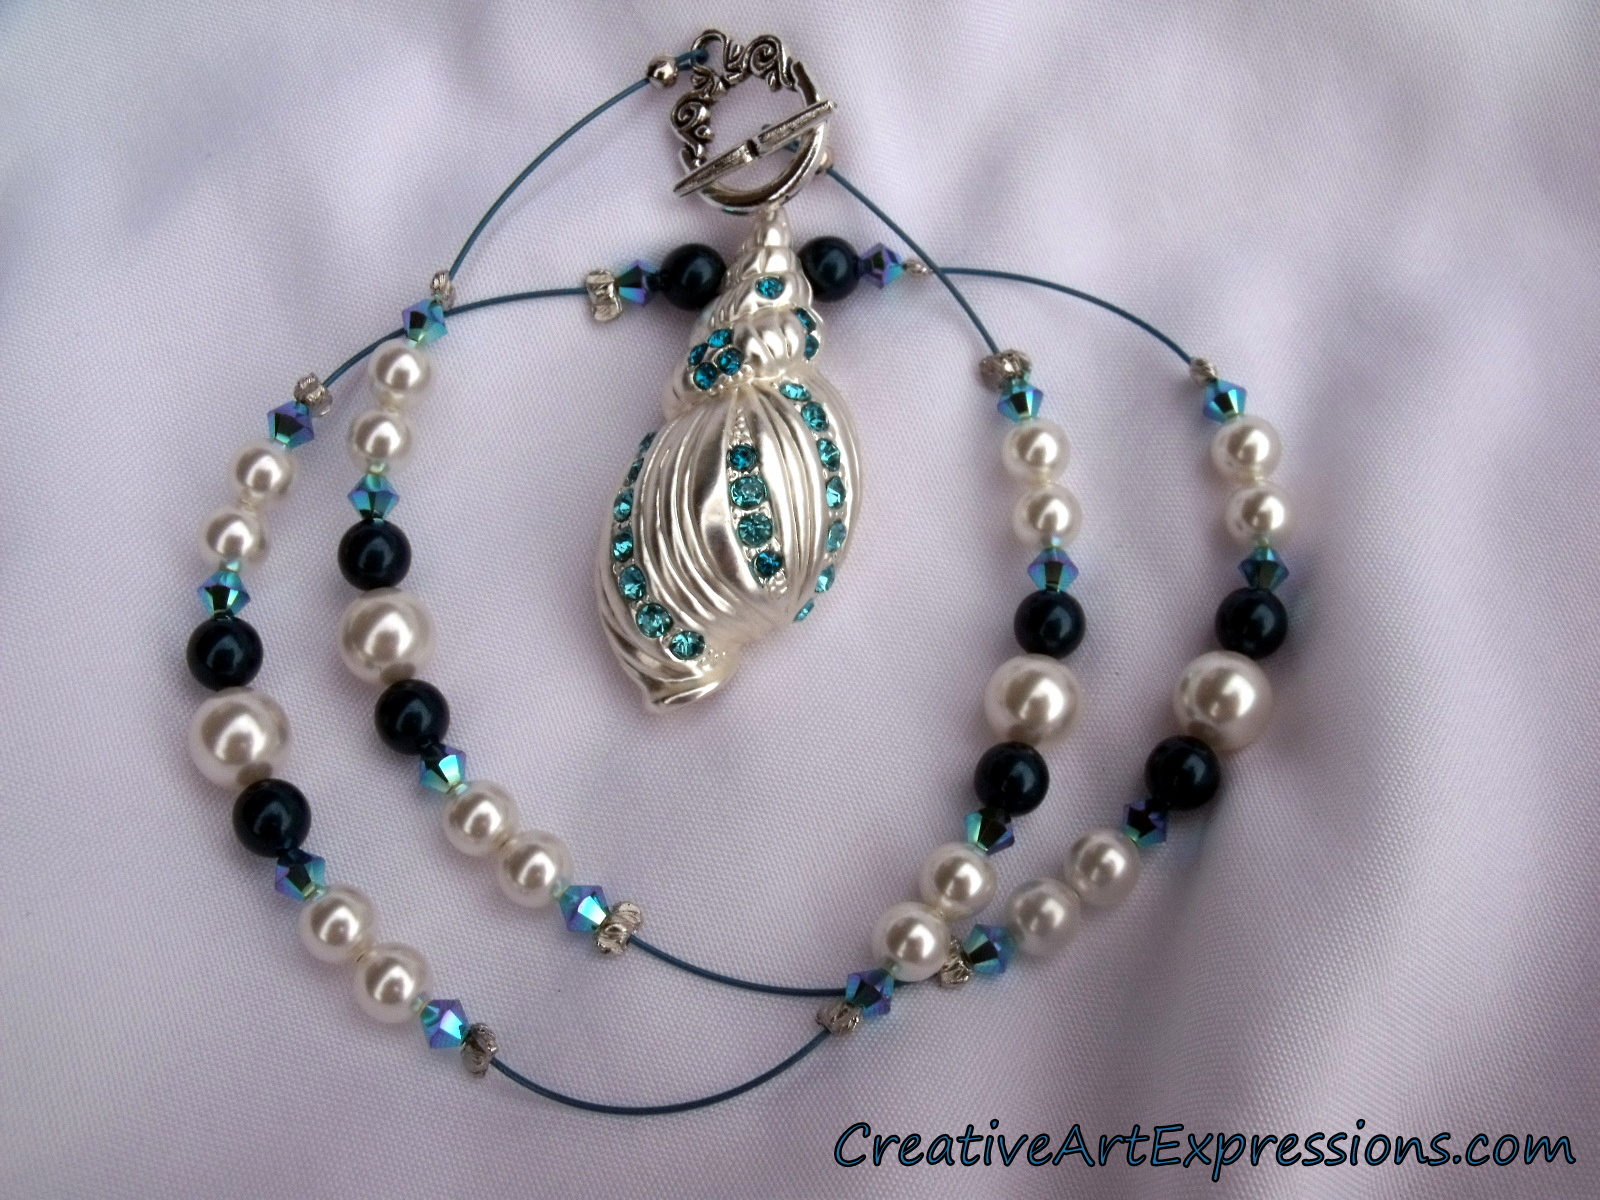 Creative Art Expressions Handmade Blue & Silver Shell Necklace Jewelry Design